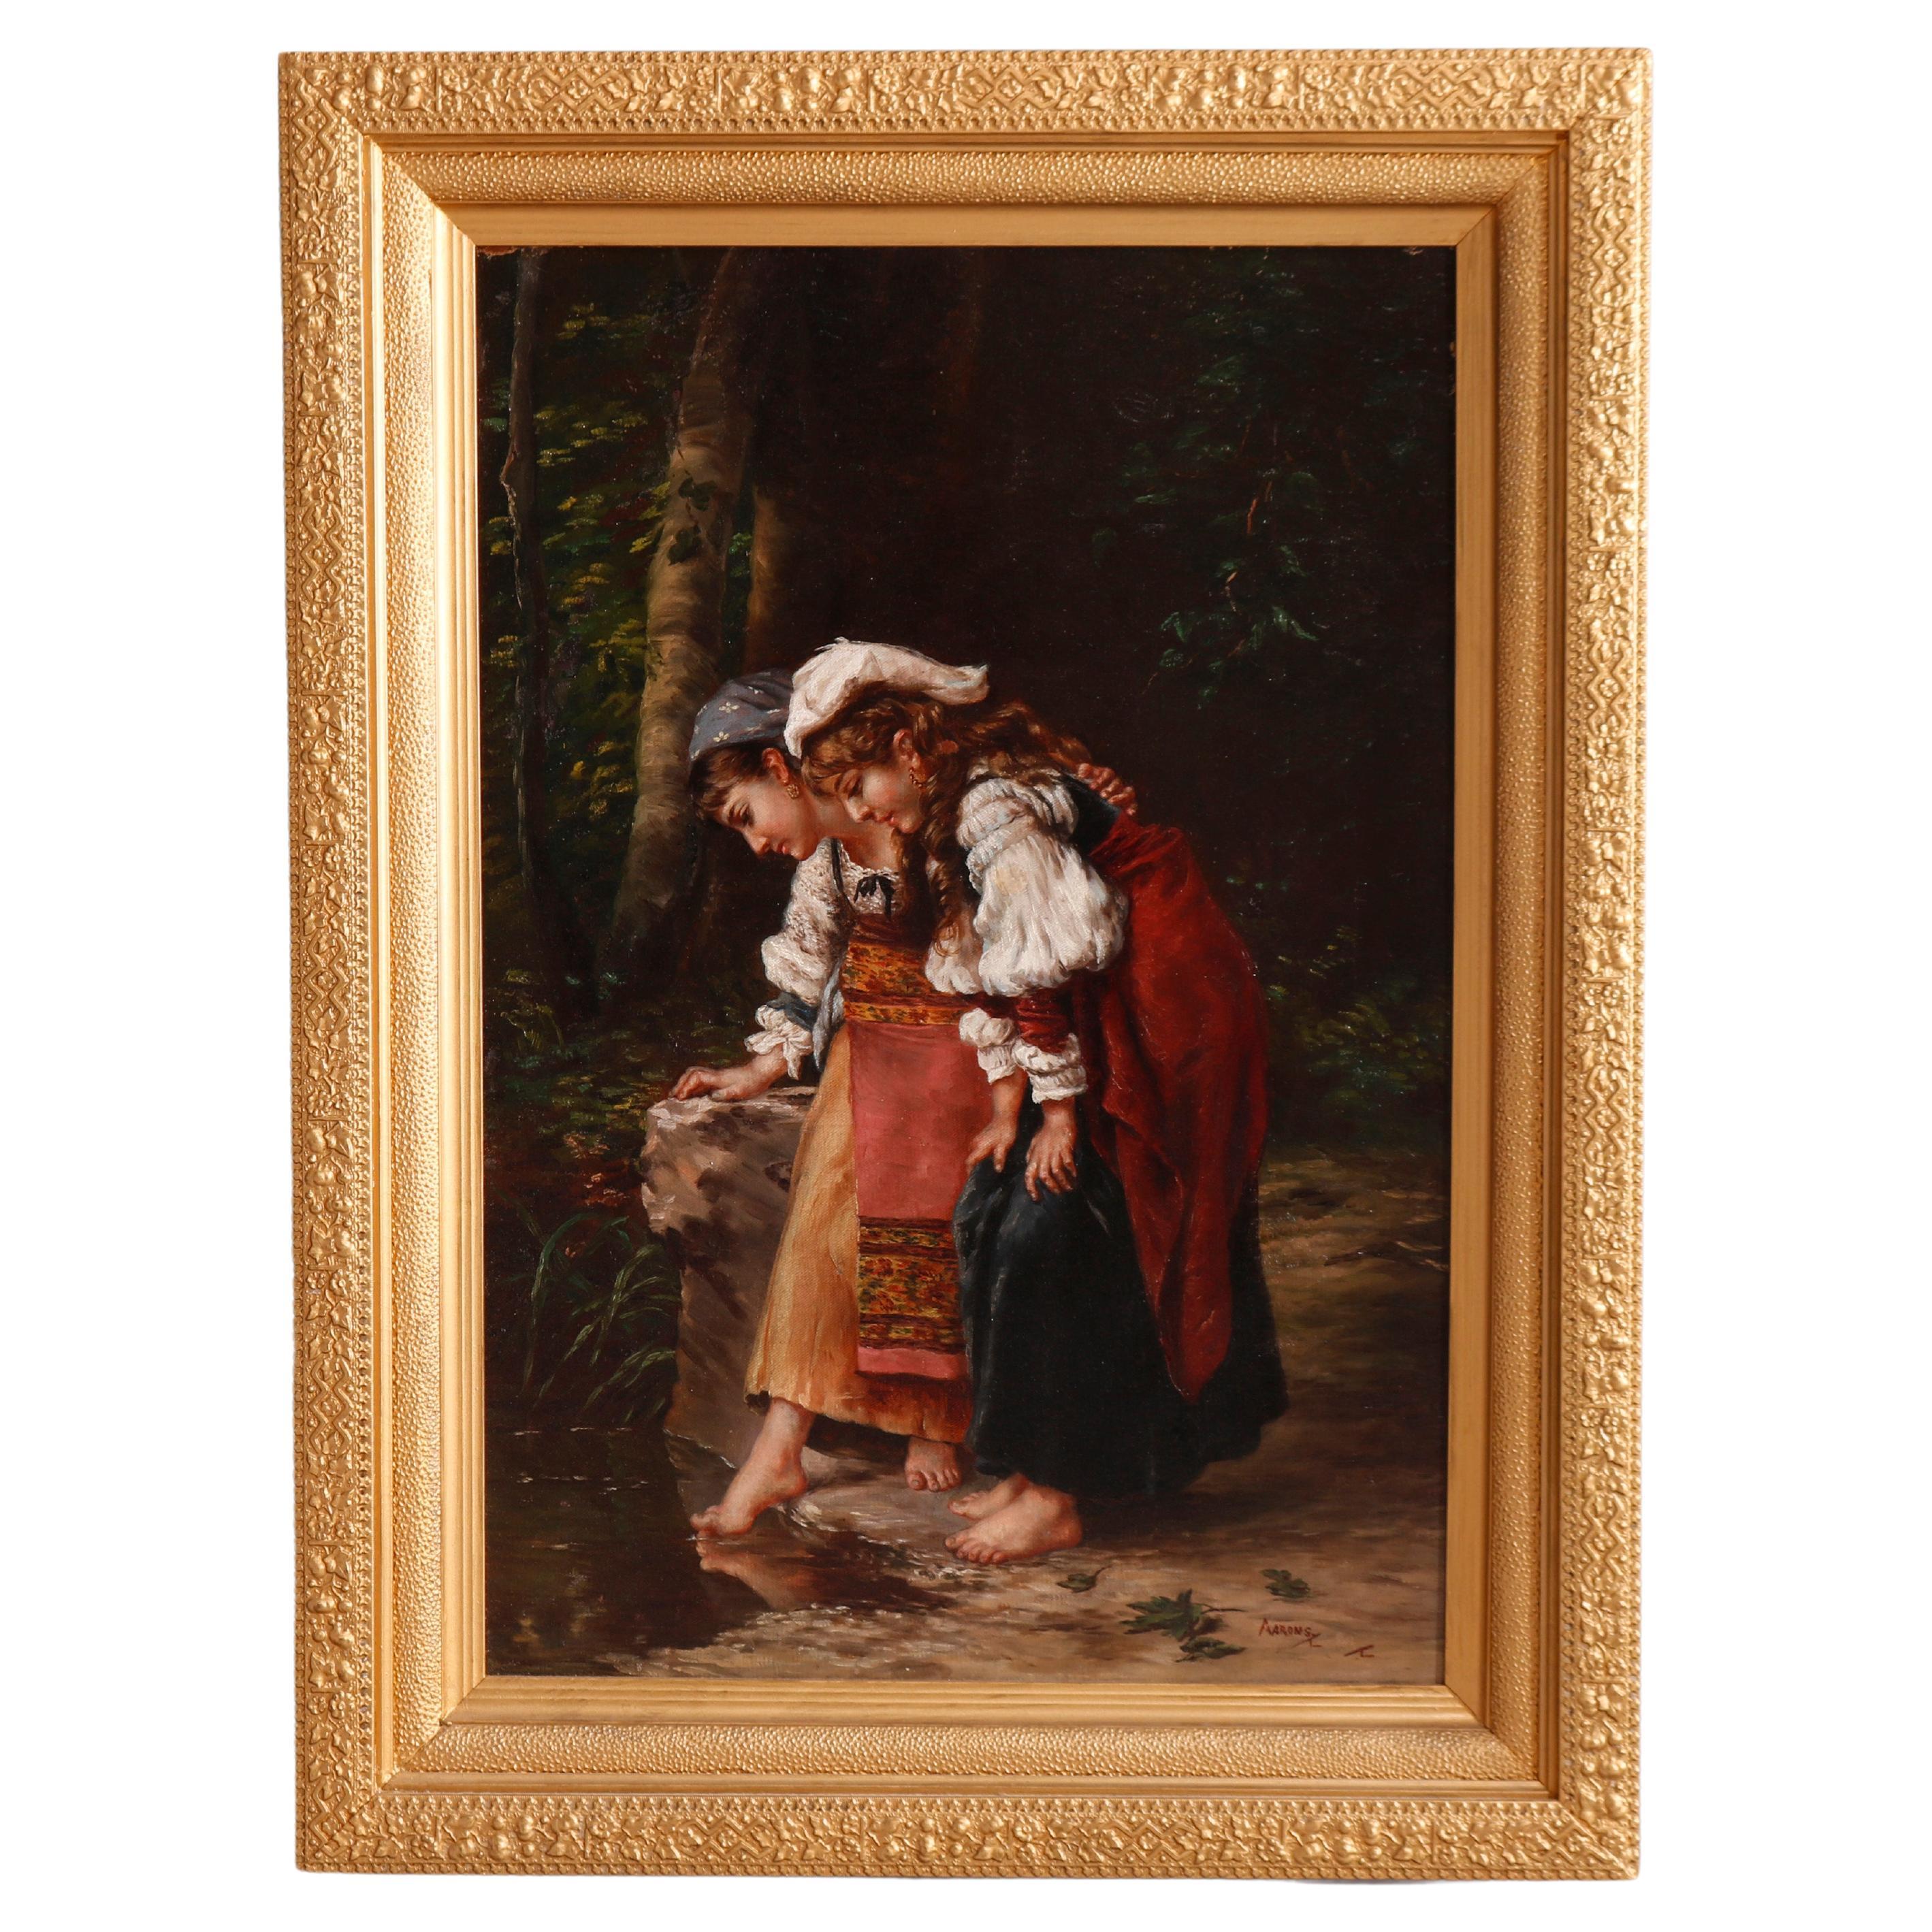 Antique Oil Painting by Aarons, Genre Scene with Two Young Girls, Circa 1890